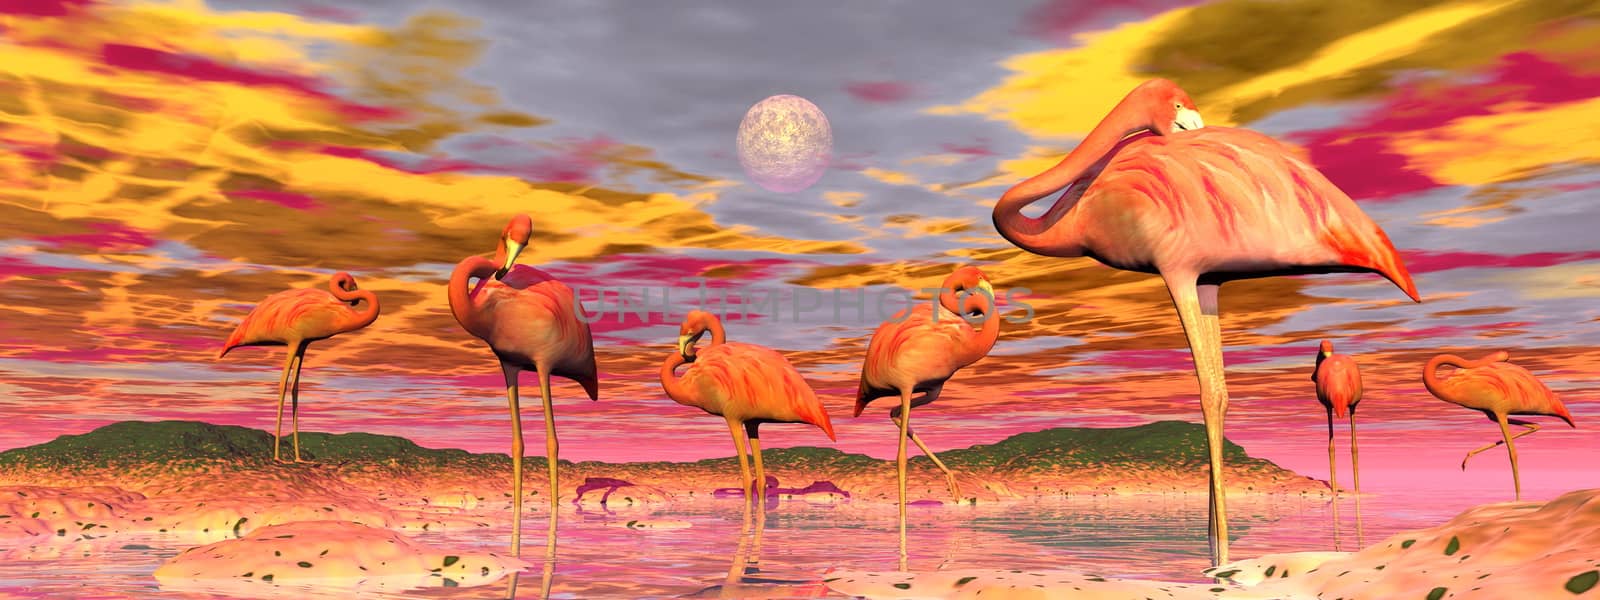 Flamingos by sunset - 3D render by Elenaphotos21